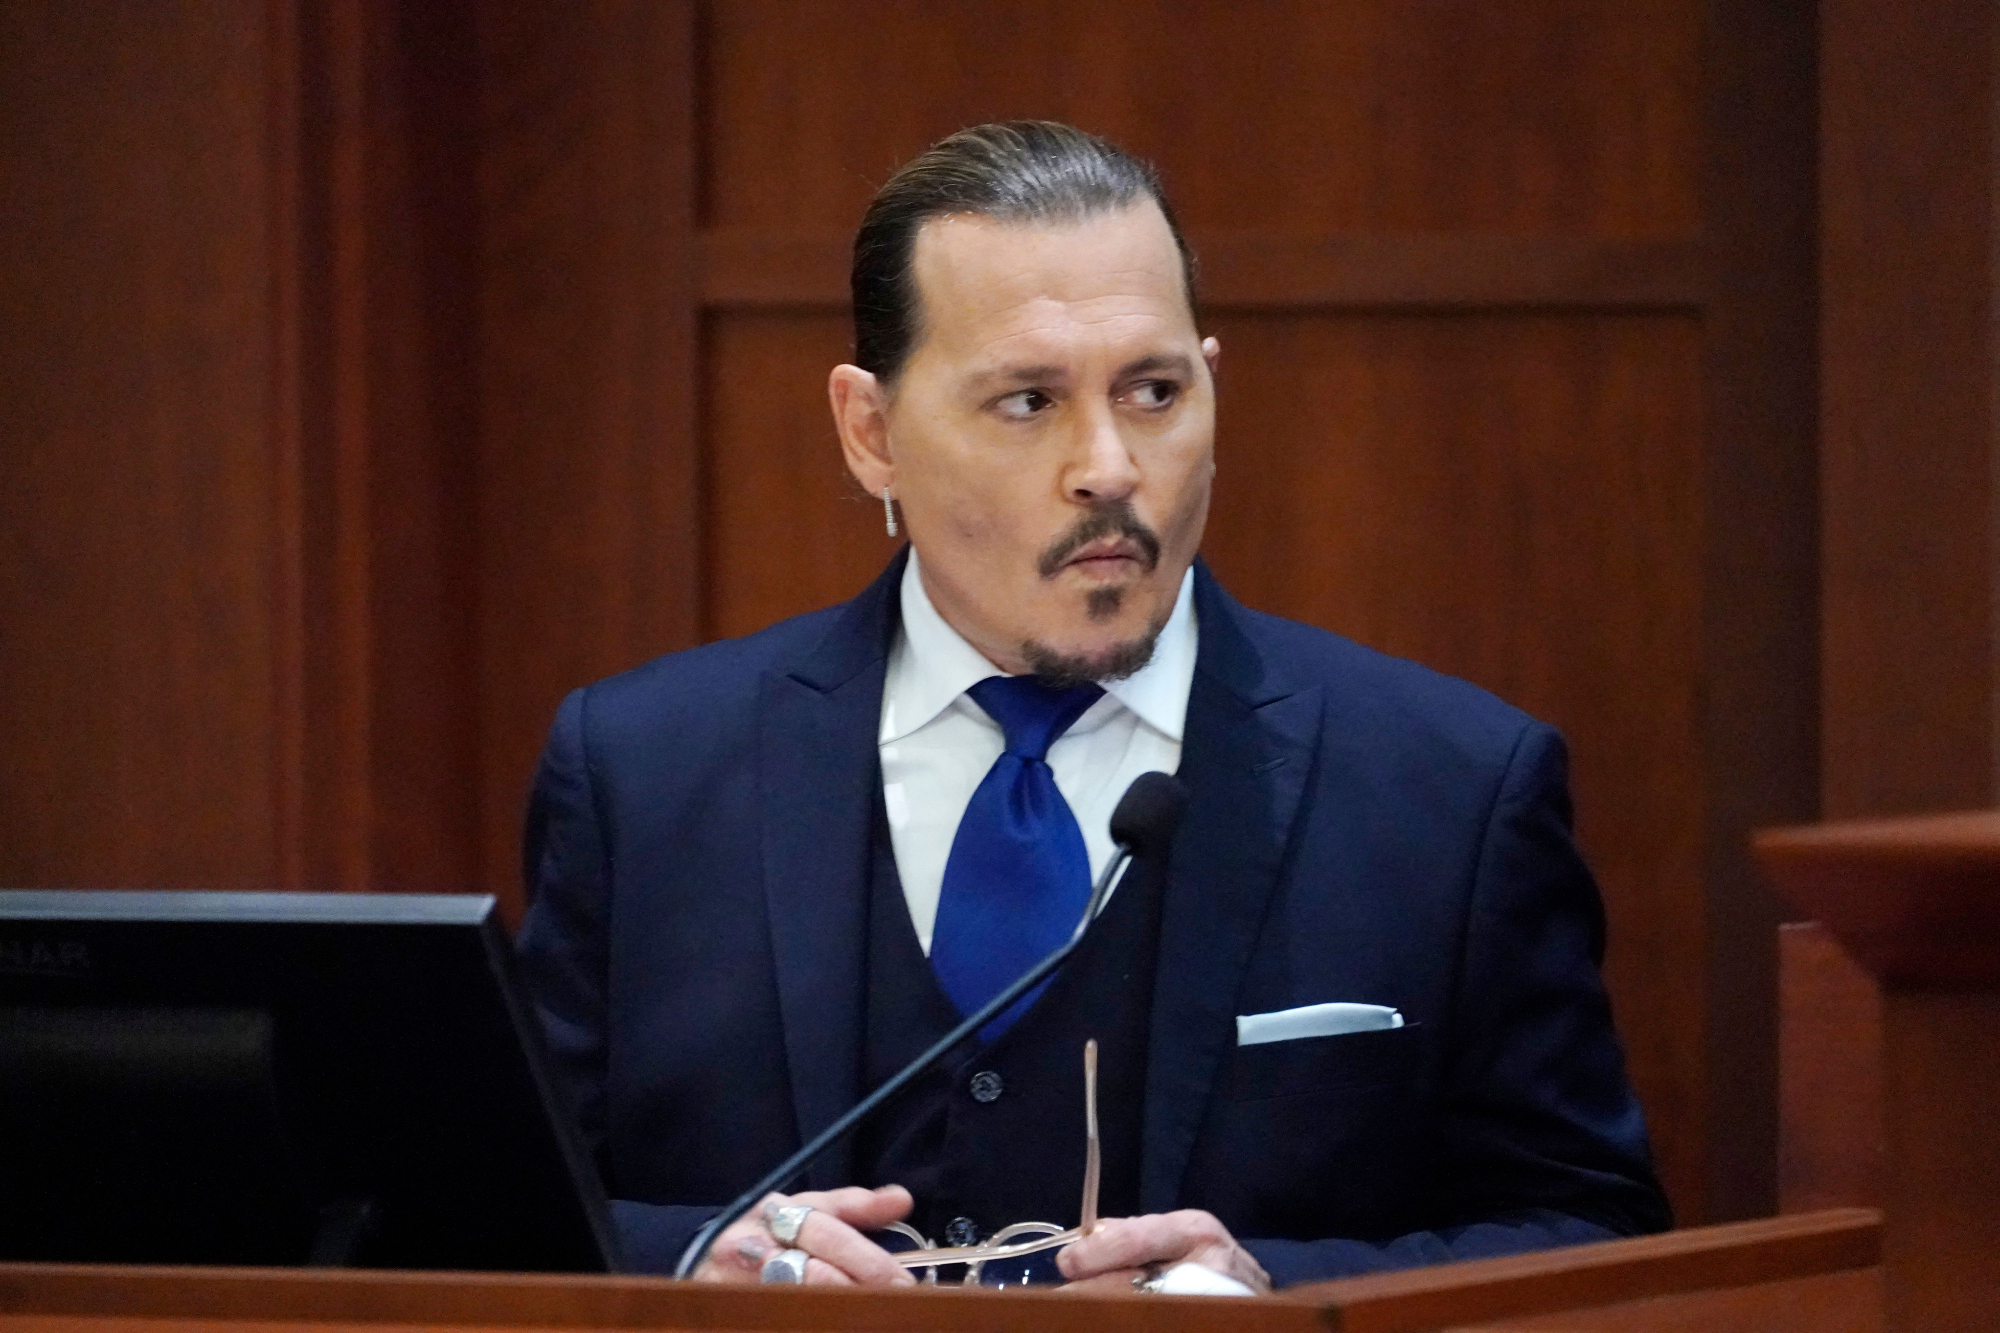 JOHNNY DEPP'S WITNESS REVERTS INTO AMBER'S LAWYER! 